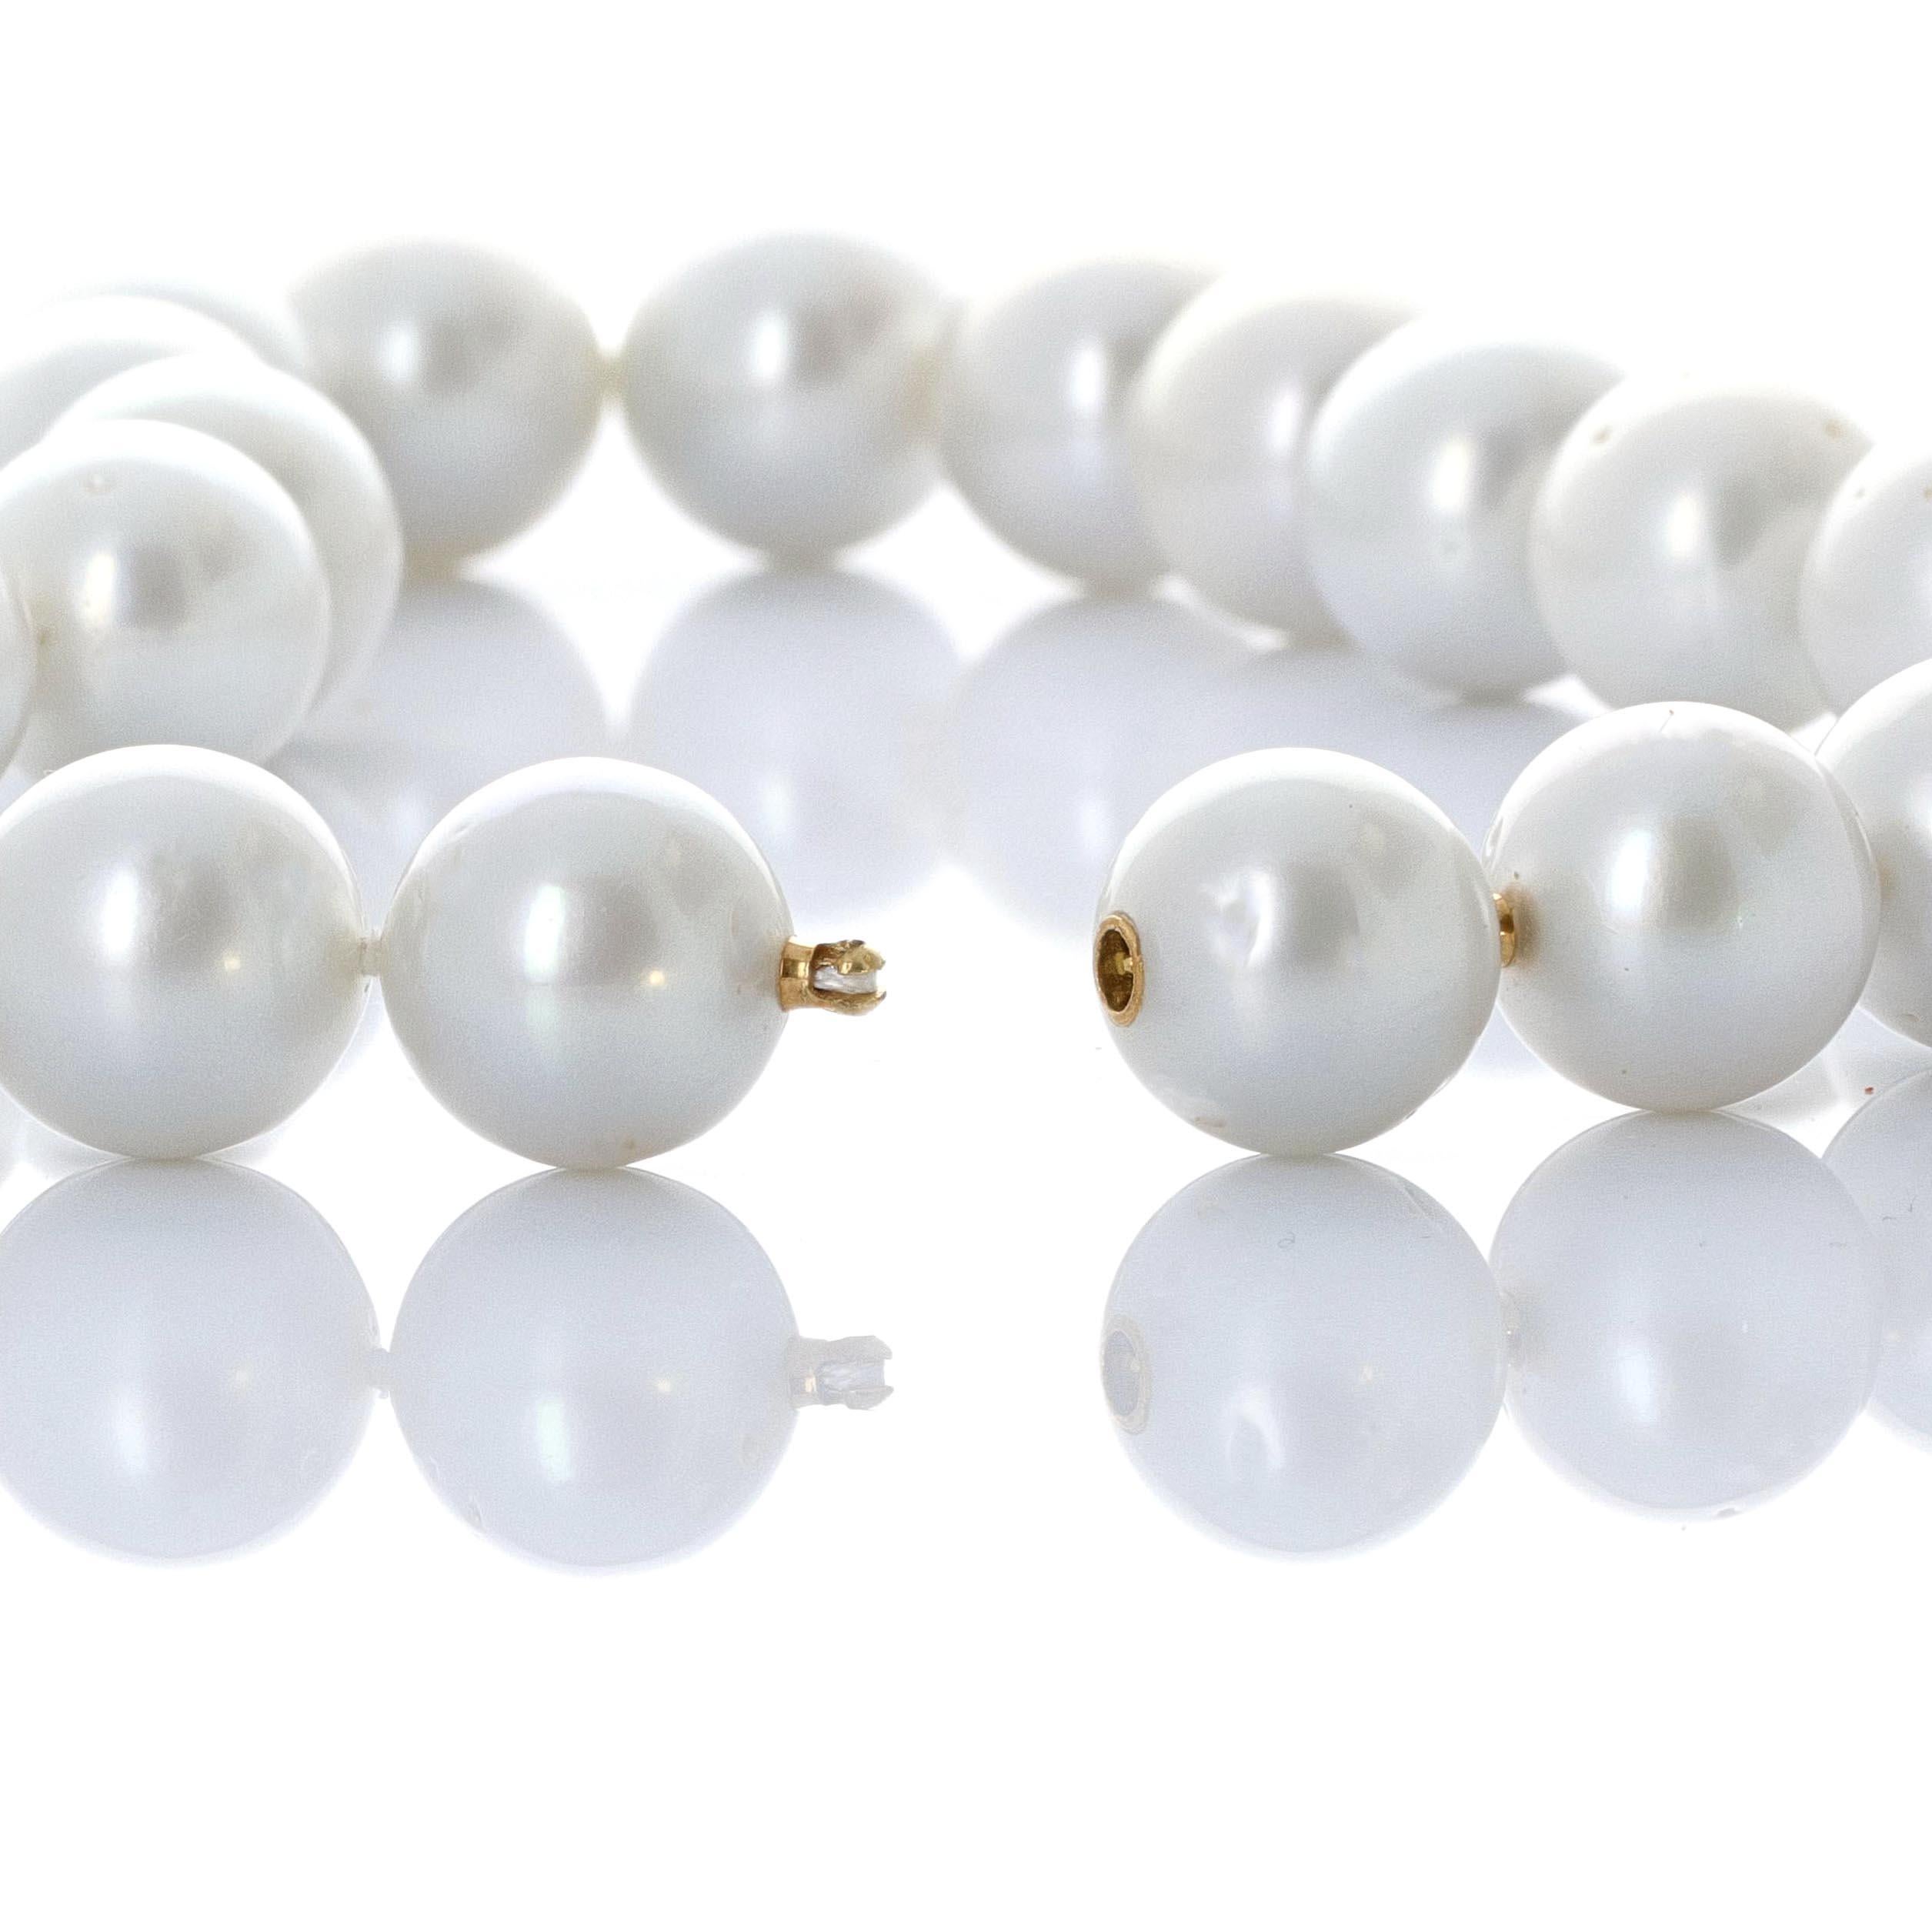 Round Cut White South Sea Pearl Necklace with Hidden Closure